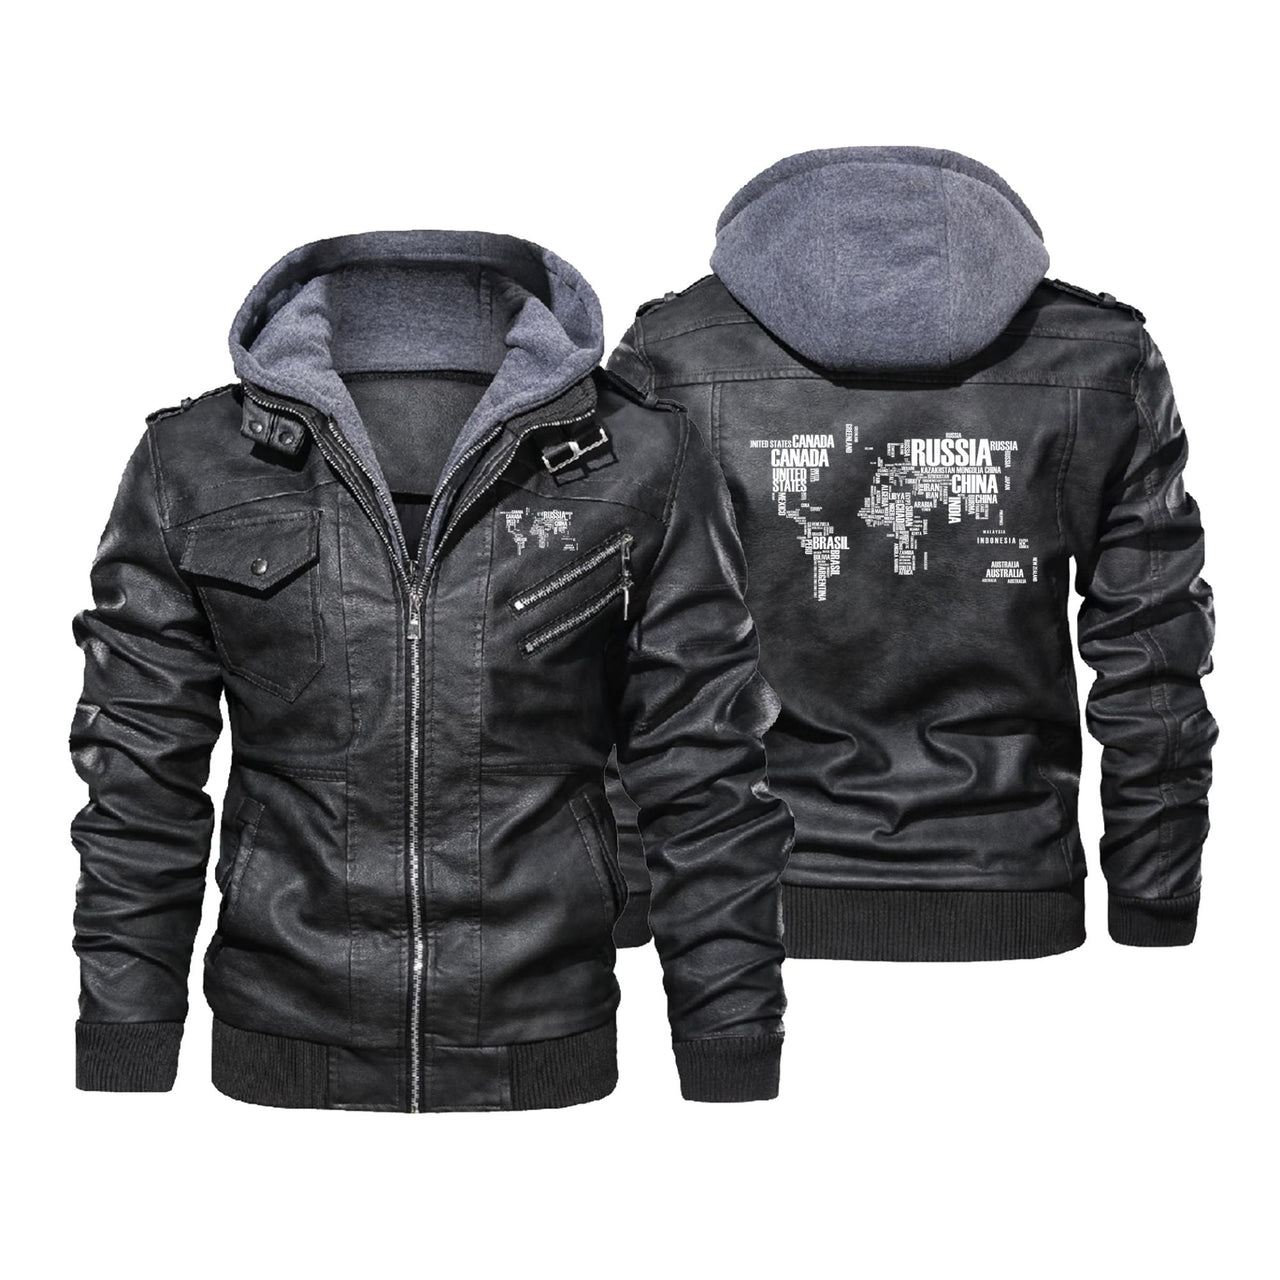 World Map (Text) Designed Hooded Leather Jackets